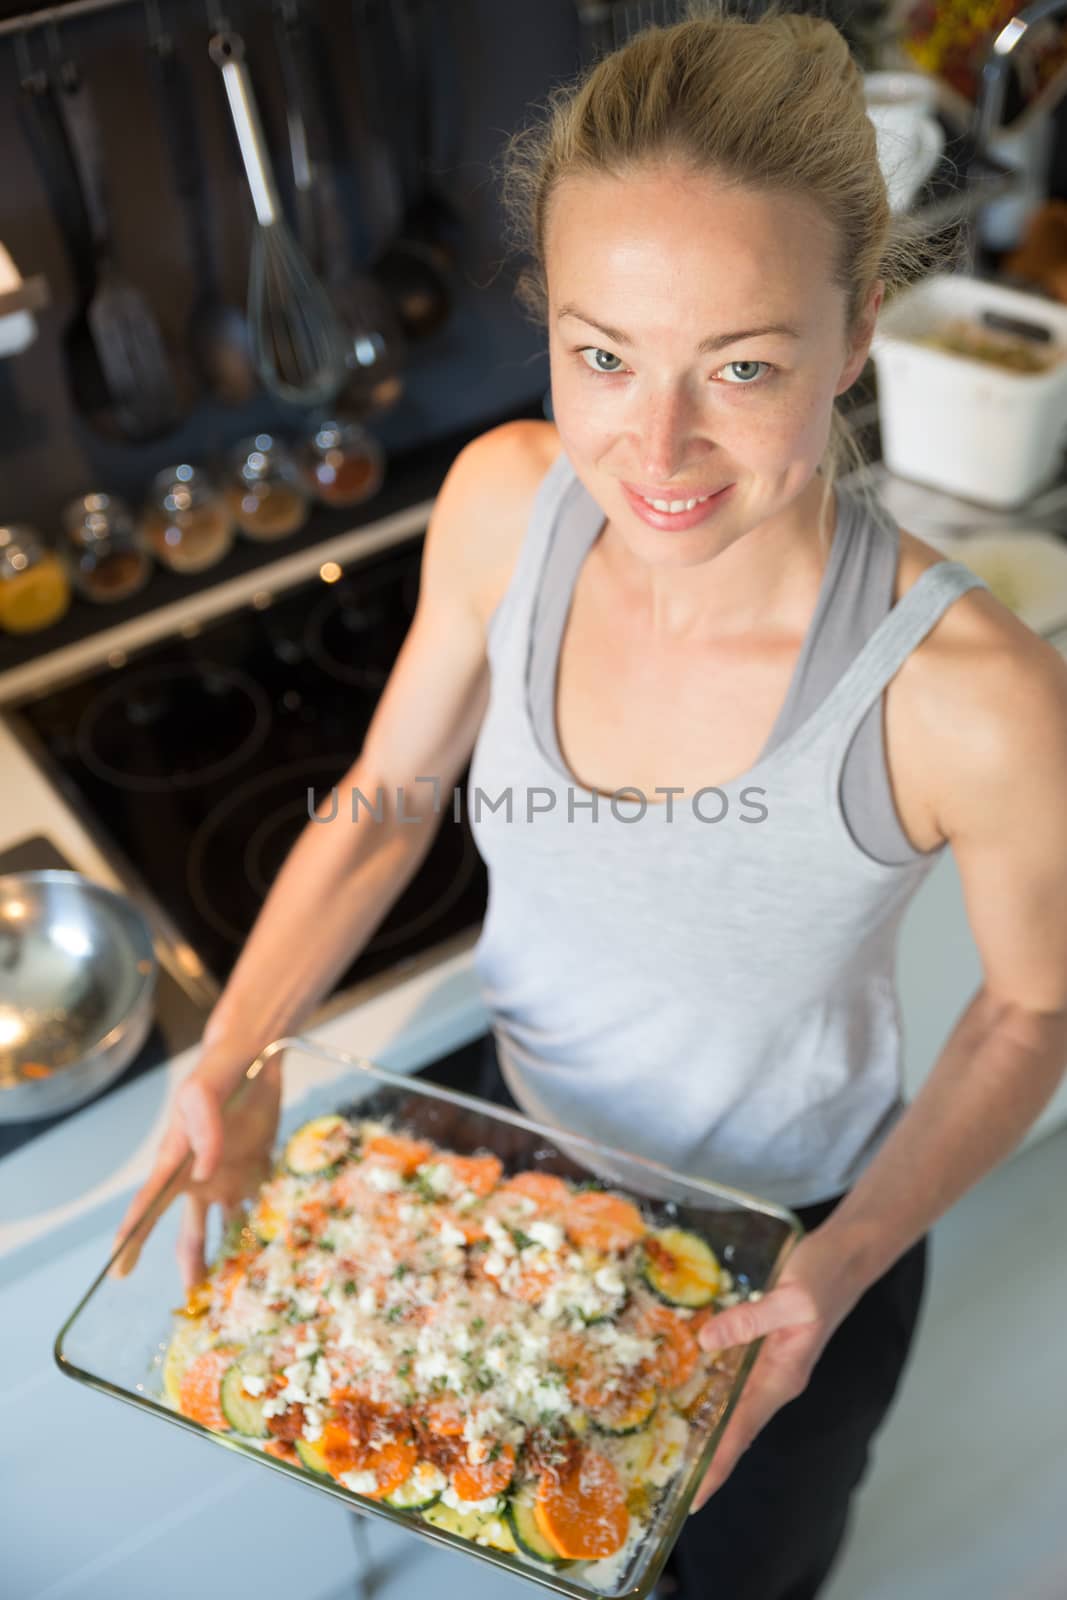 Smiling young healthy woman holding and proudly showing glass baking try with row vegetarian dish ingredients before placing it into oven. Healthy home-cooked everyday vegetarian food.